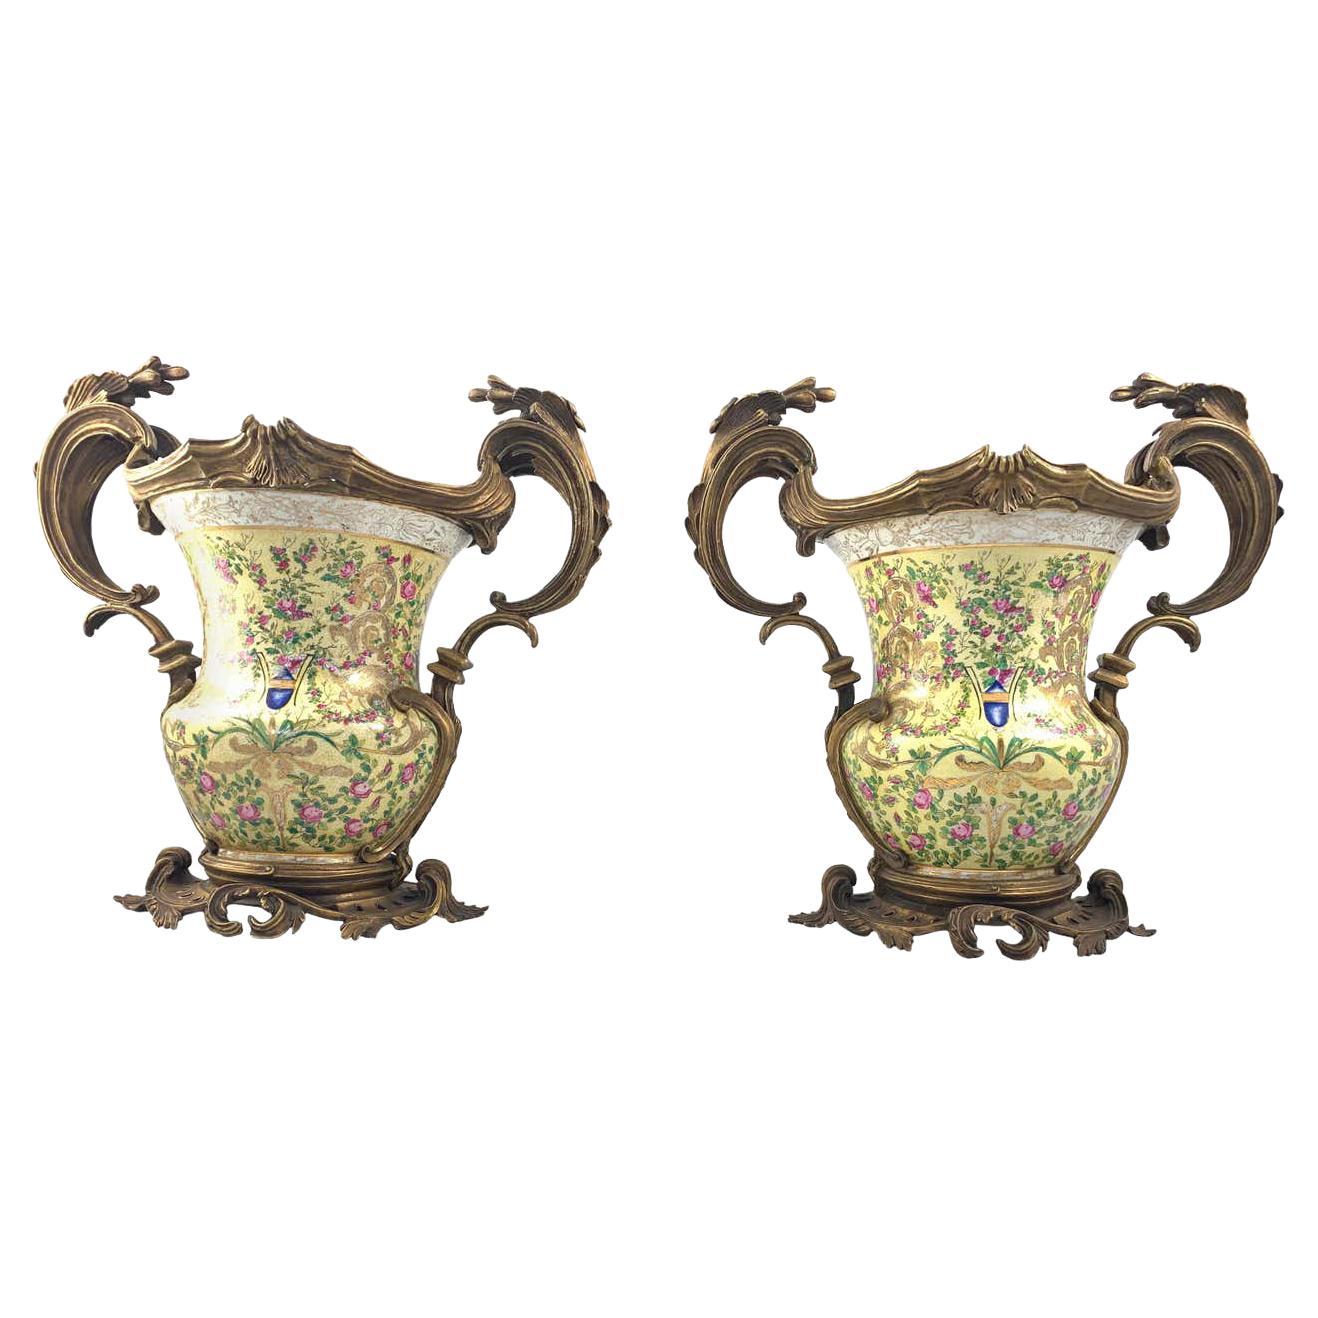 20th Century Pair of French Porcelain and Ormolu-Mounted Twin Handled Urns For Sale